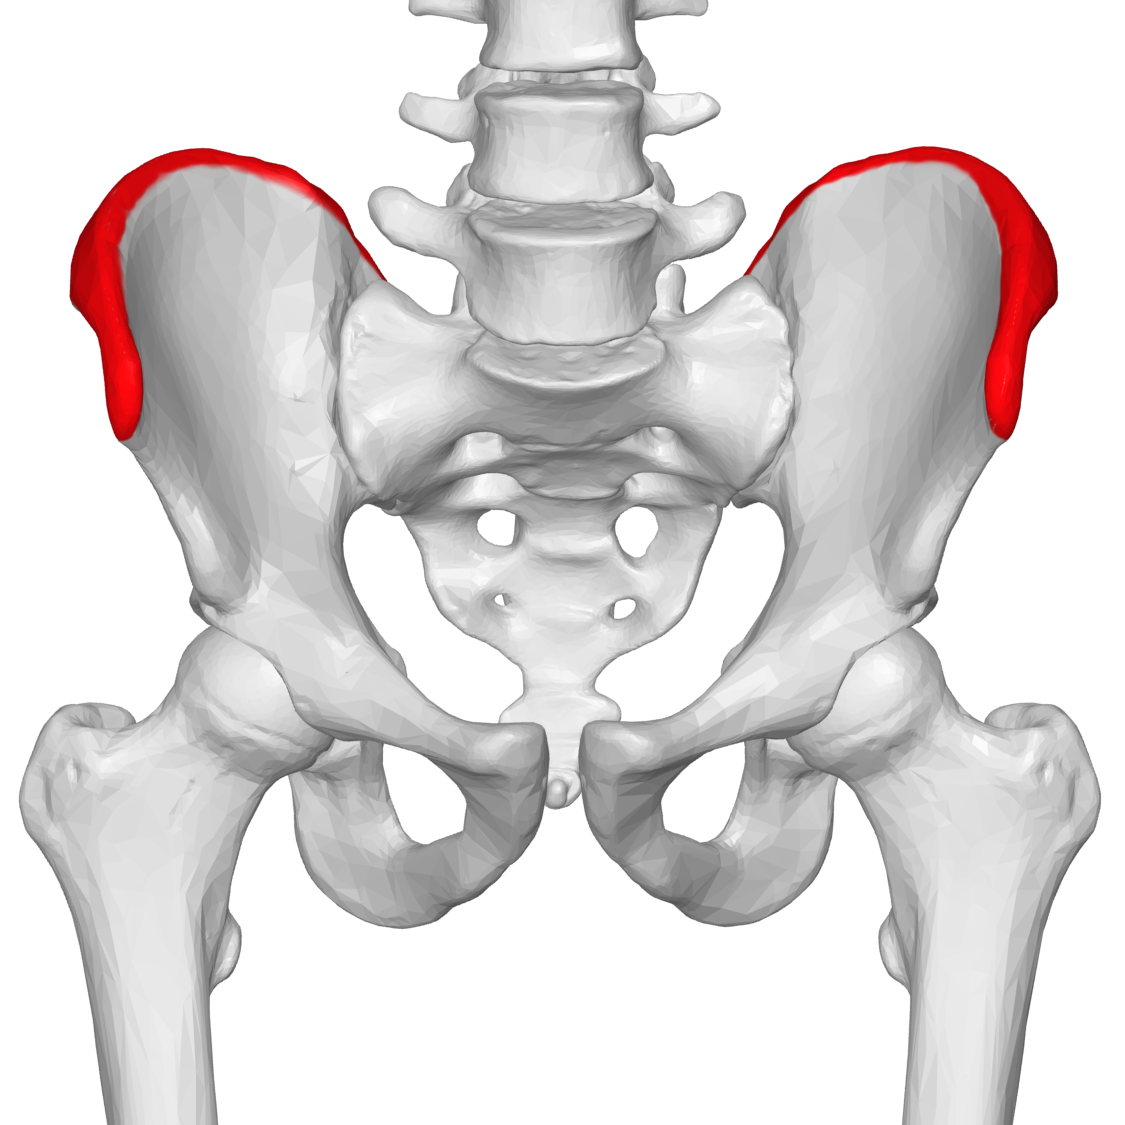 File:Iliac crest 03 - anterior view.png - Wikimedia Commons